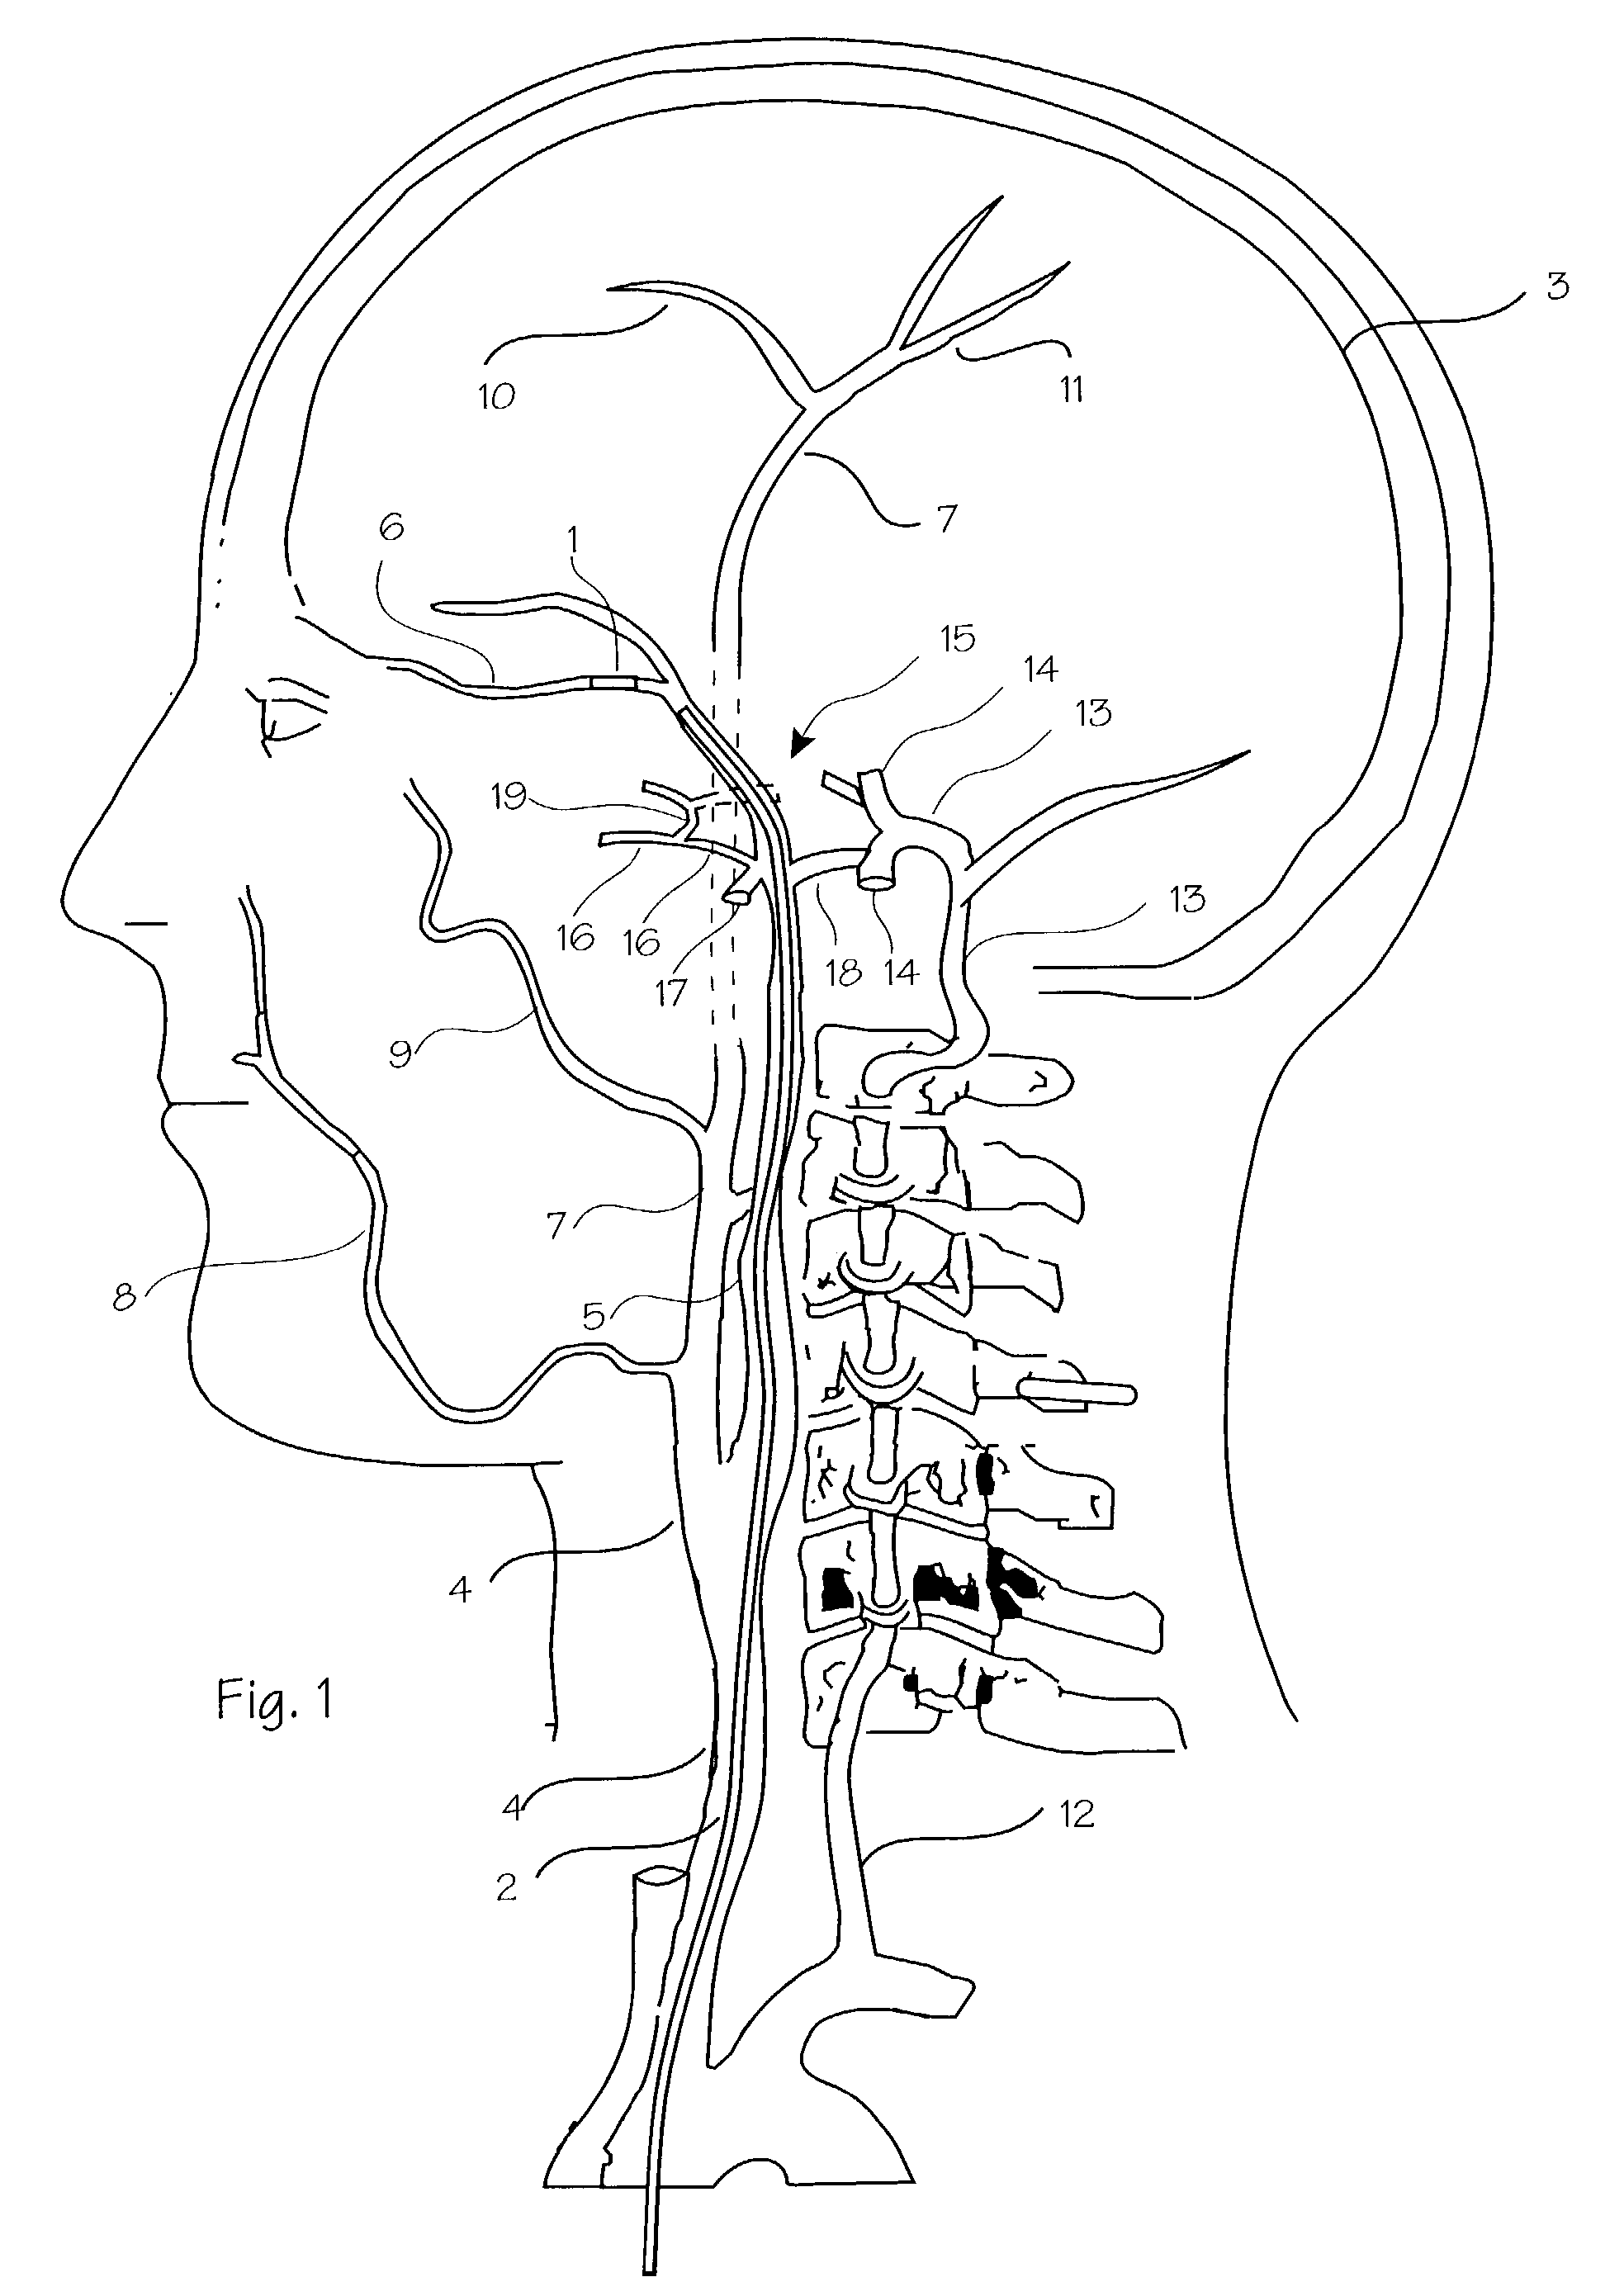 Intracranial stent and method of use